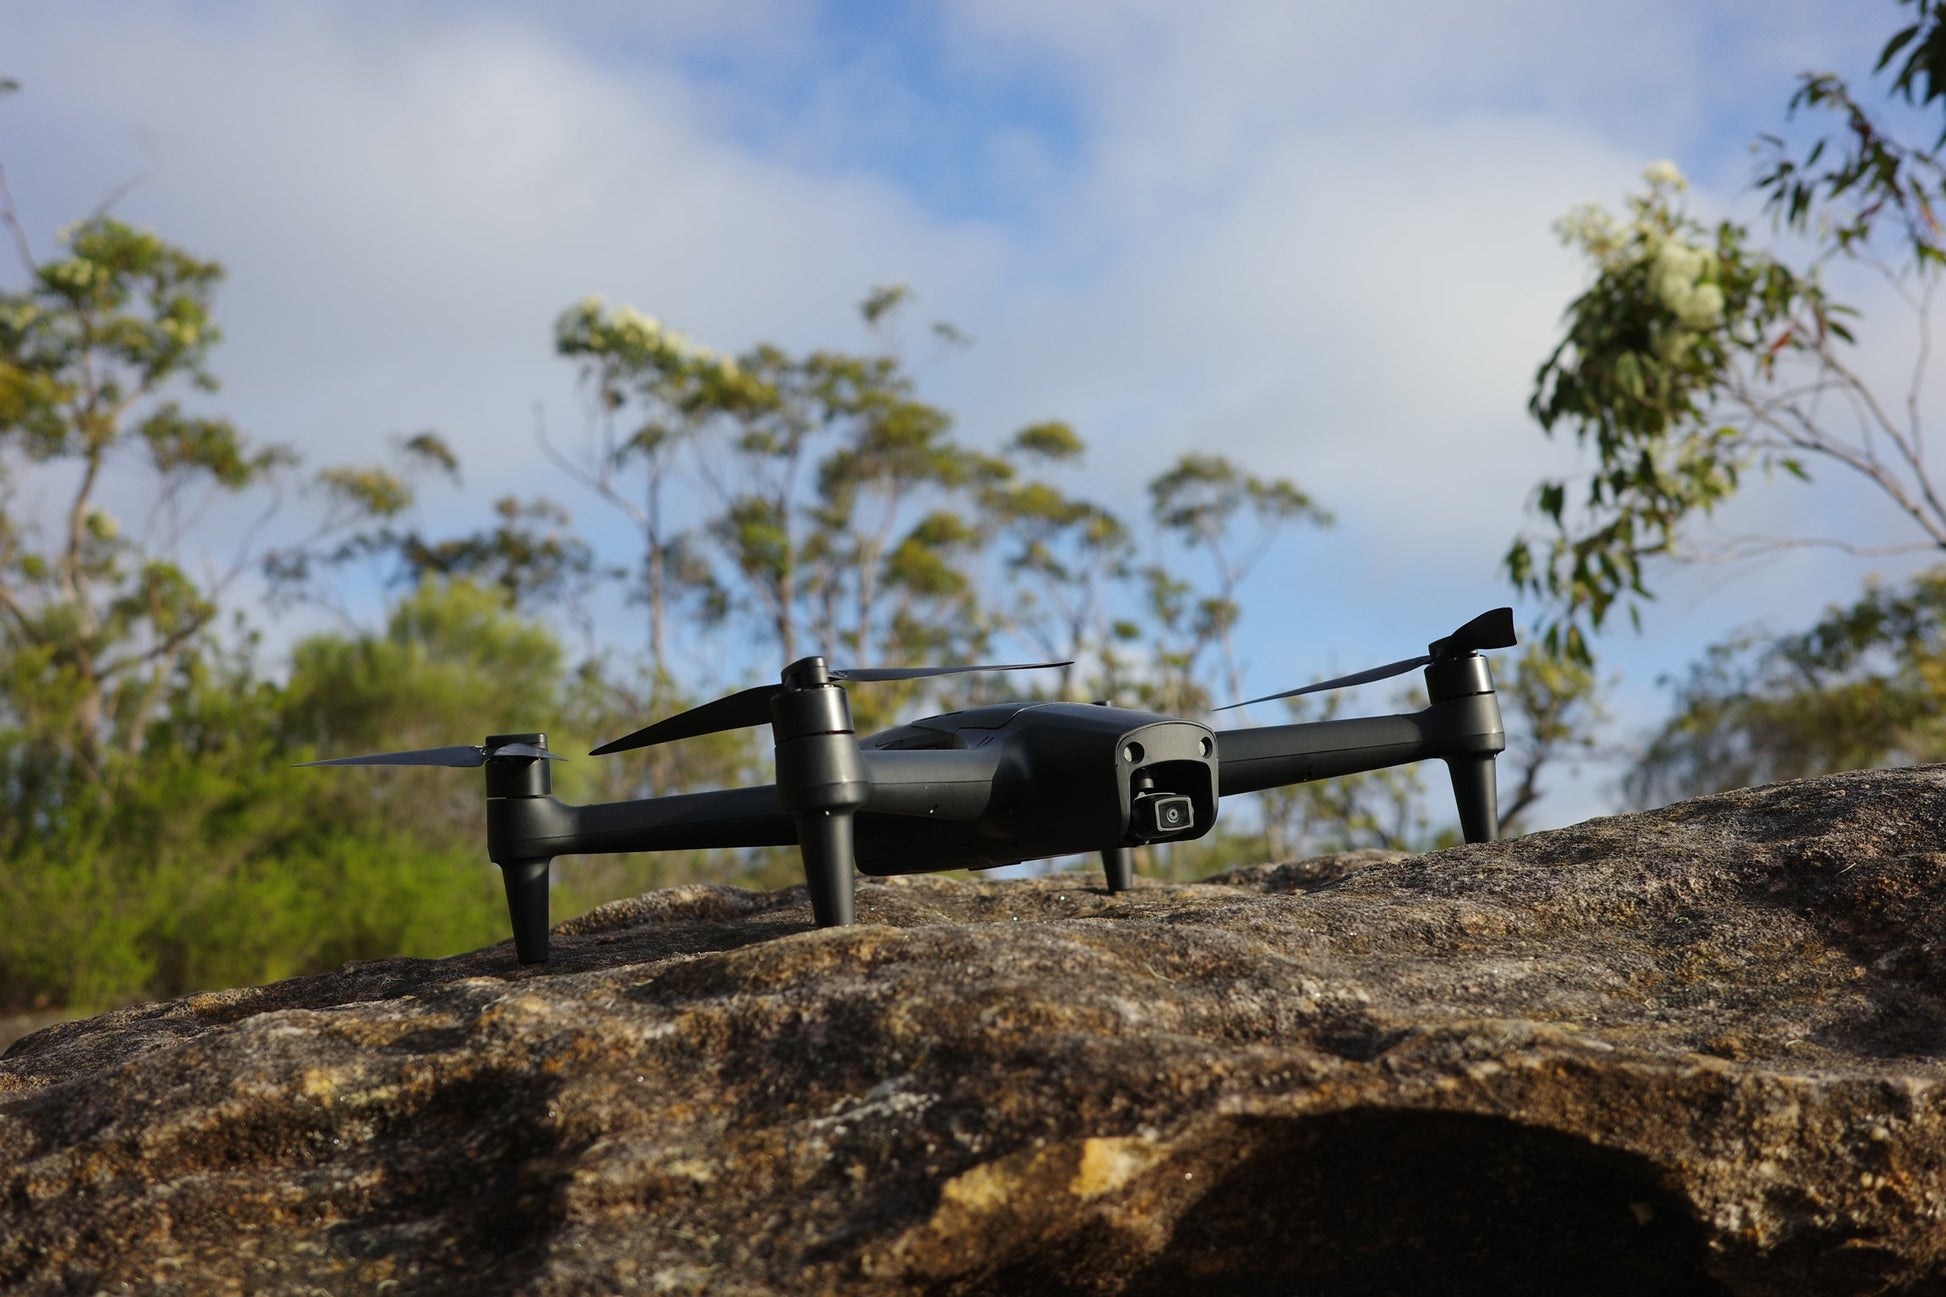 Aeroo Pro drone stationary on a rock with blue sky and trees in the background